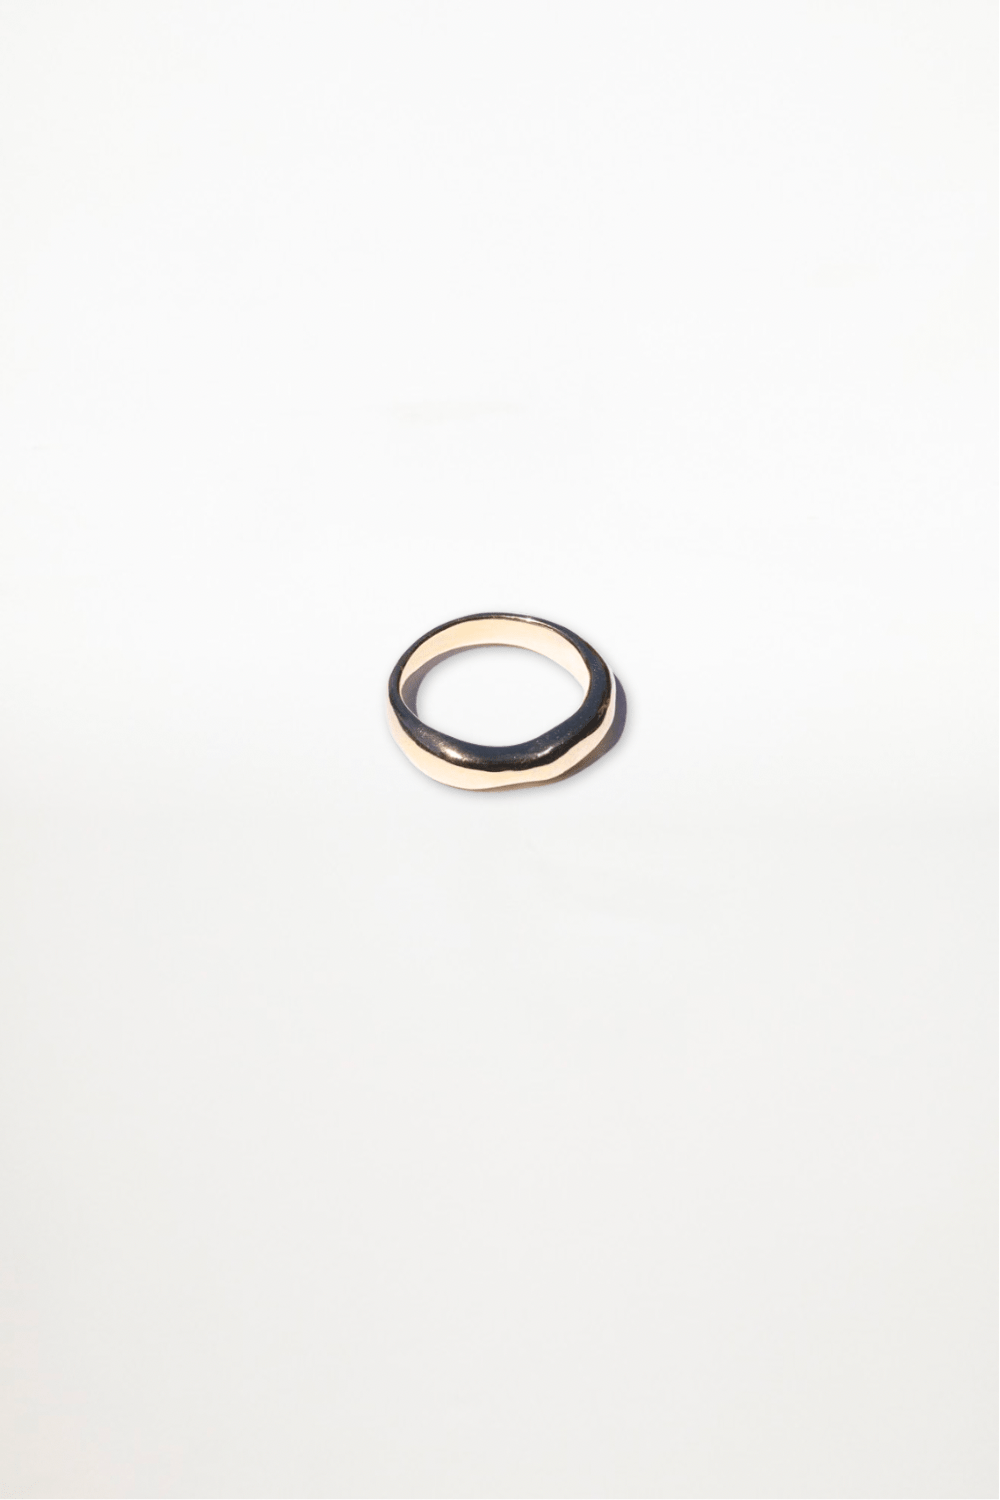 Lilly Buttrose - Cloud Ring - Gold - Ensemble Studios